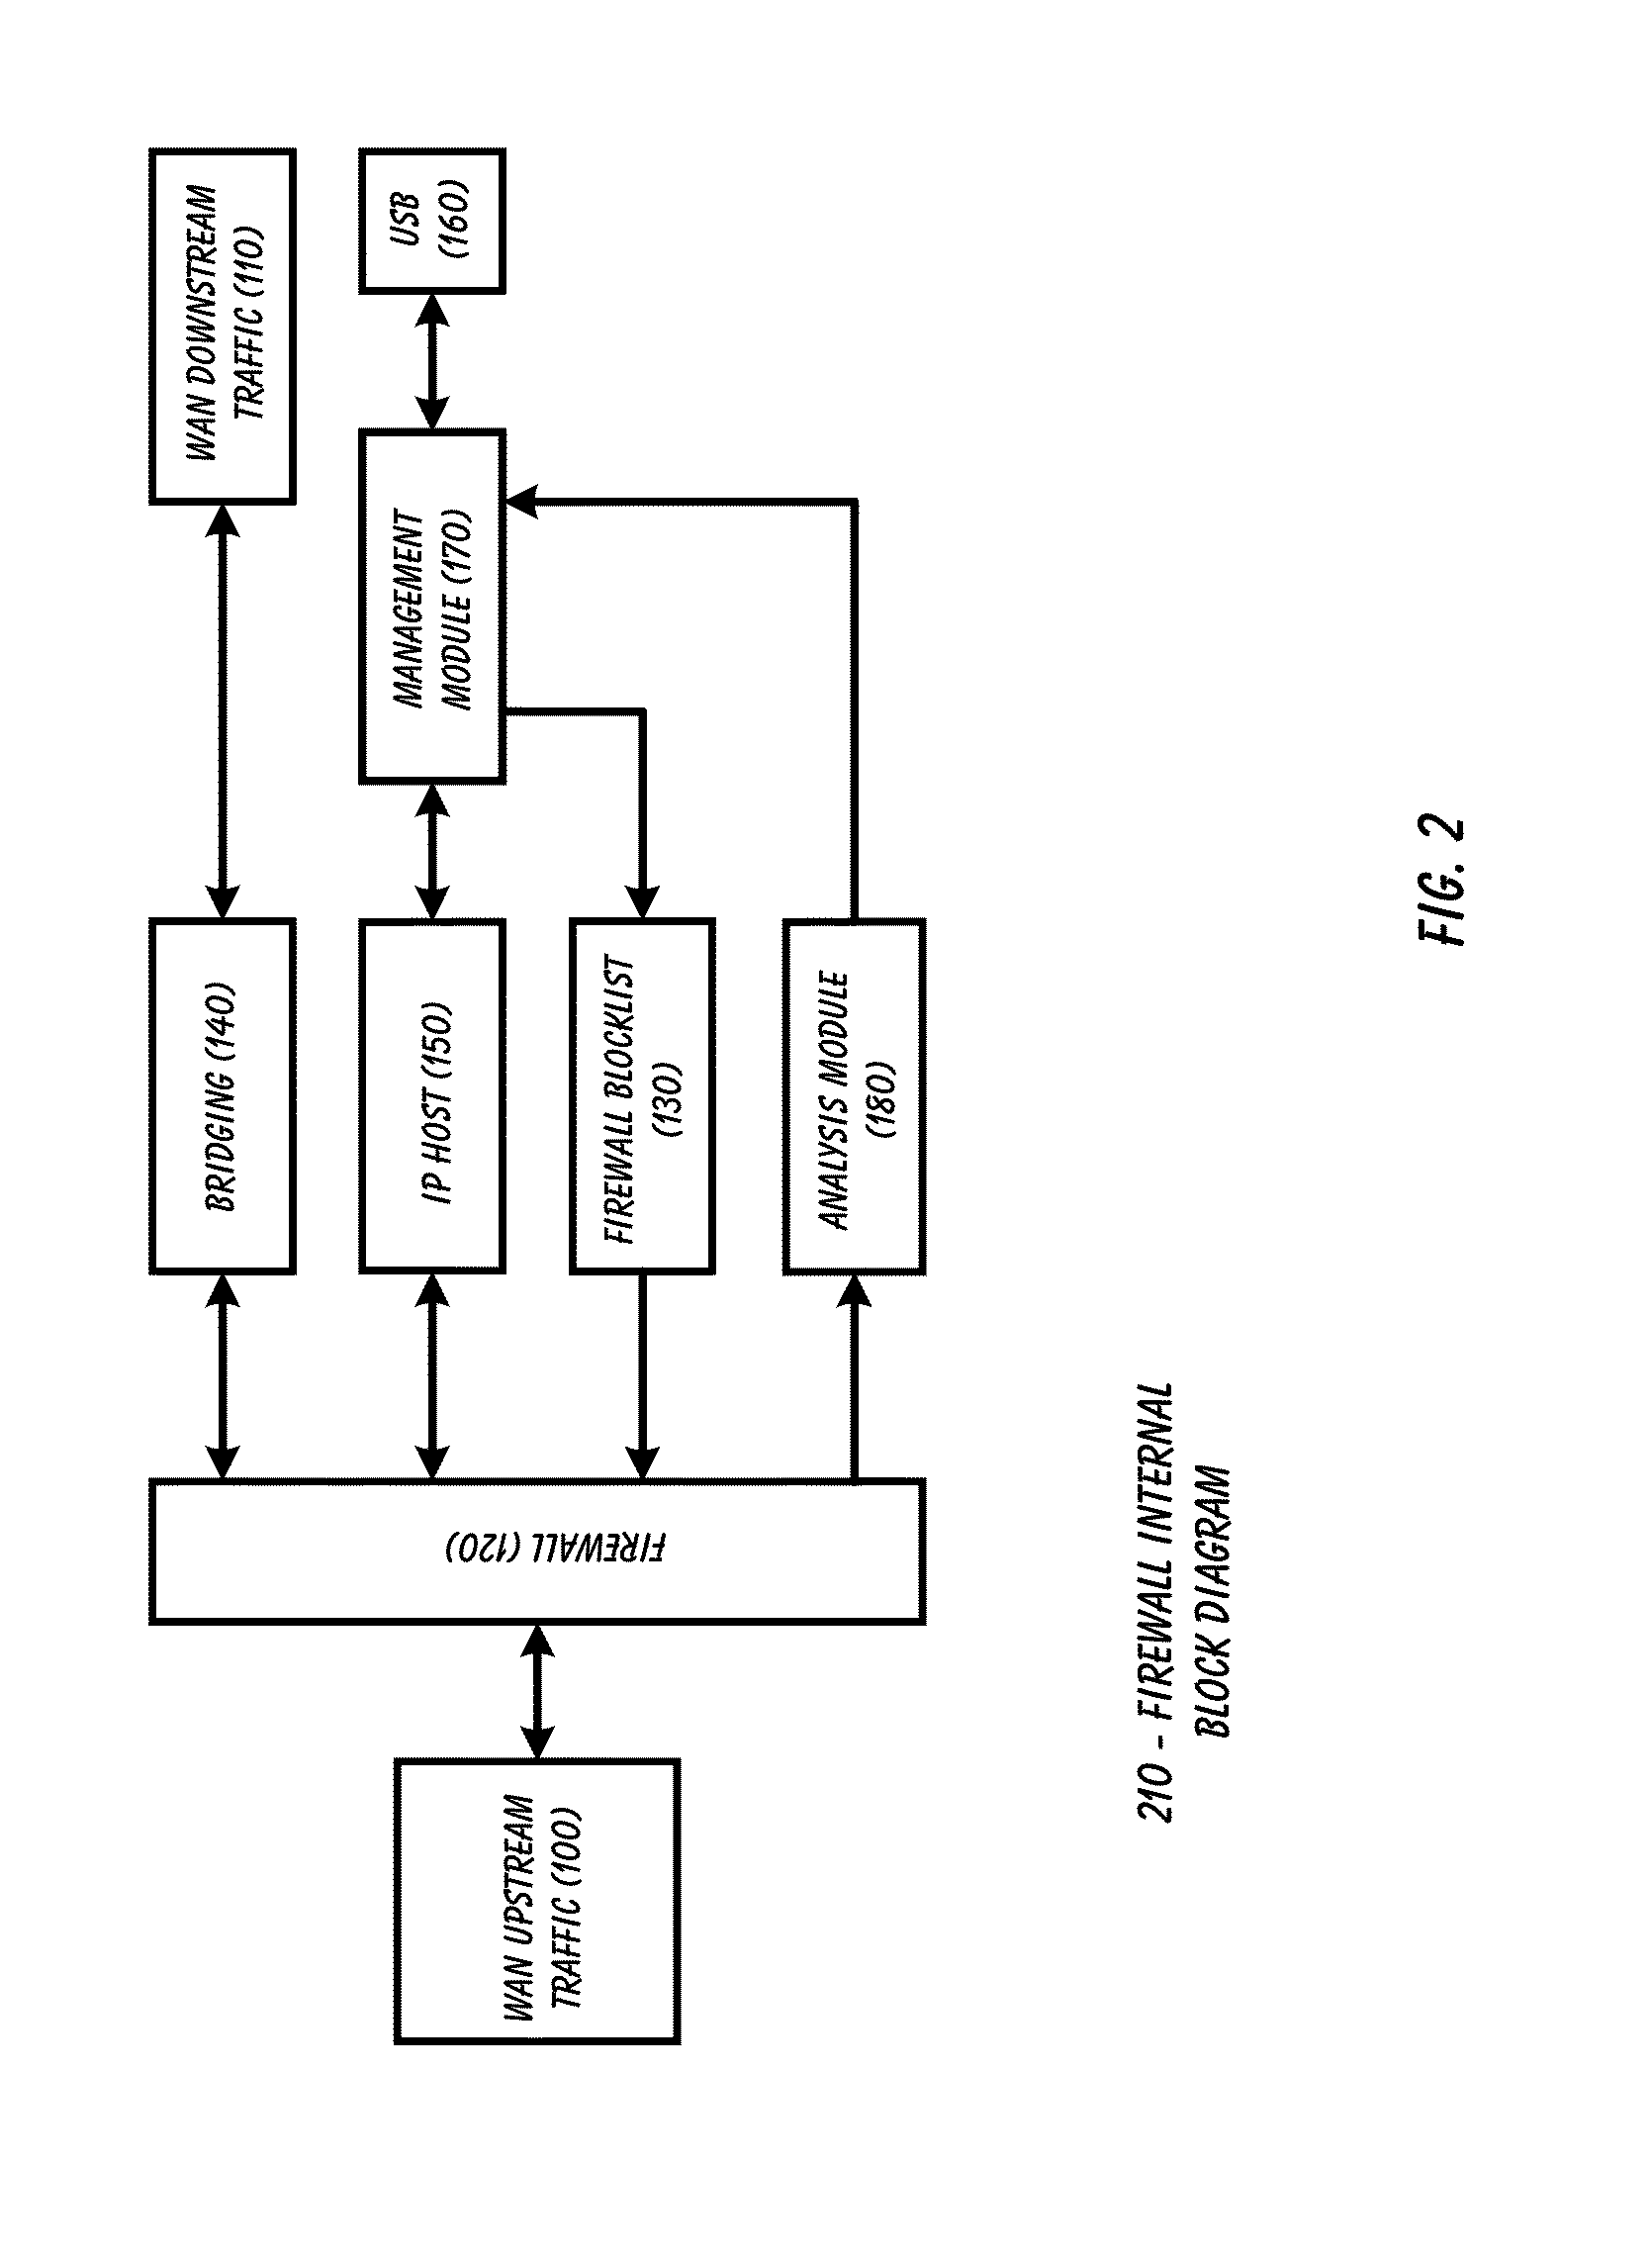 Method And Technique for Automated Collection, Analysis, and Distribution of Network Security Threat Information